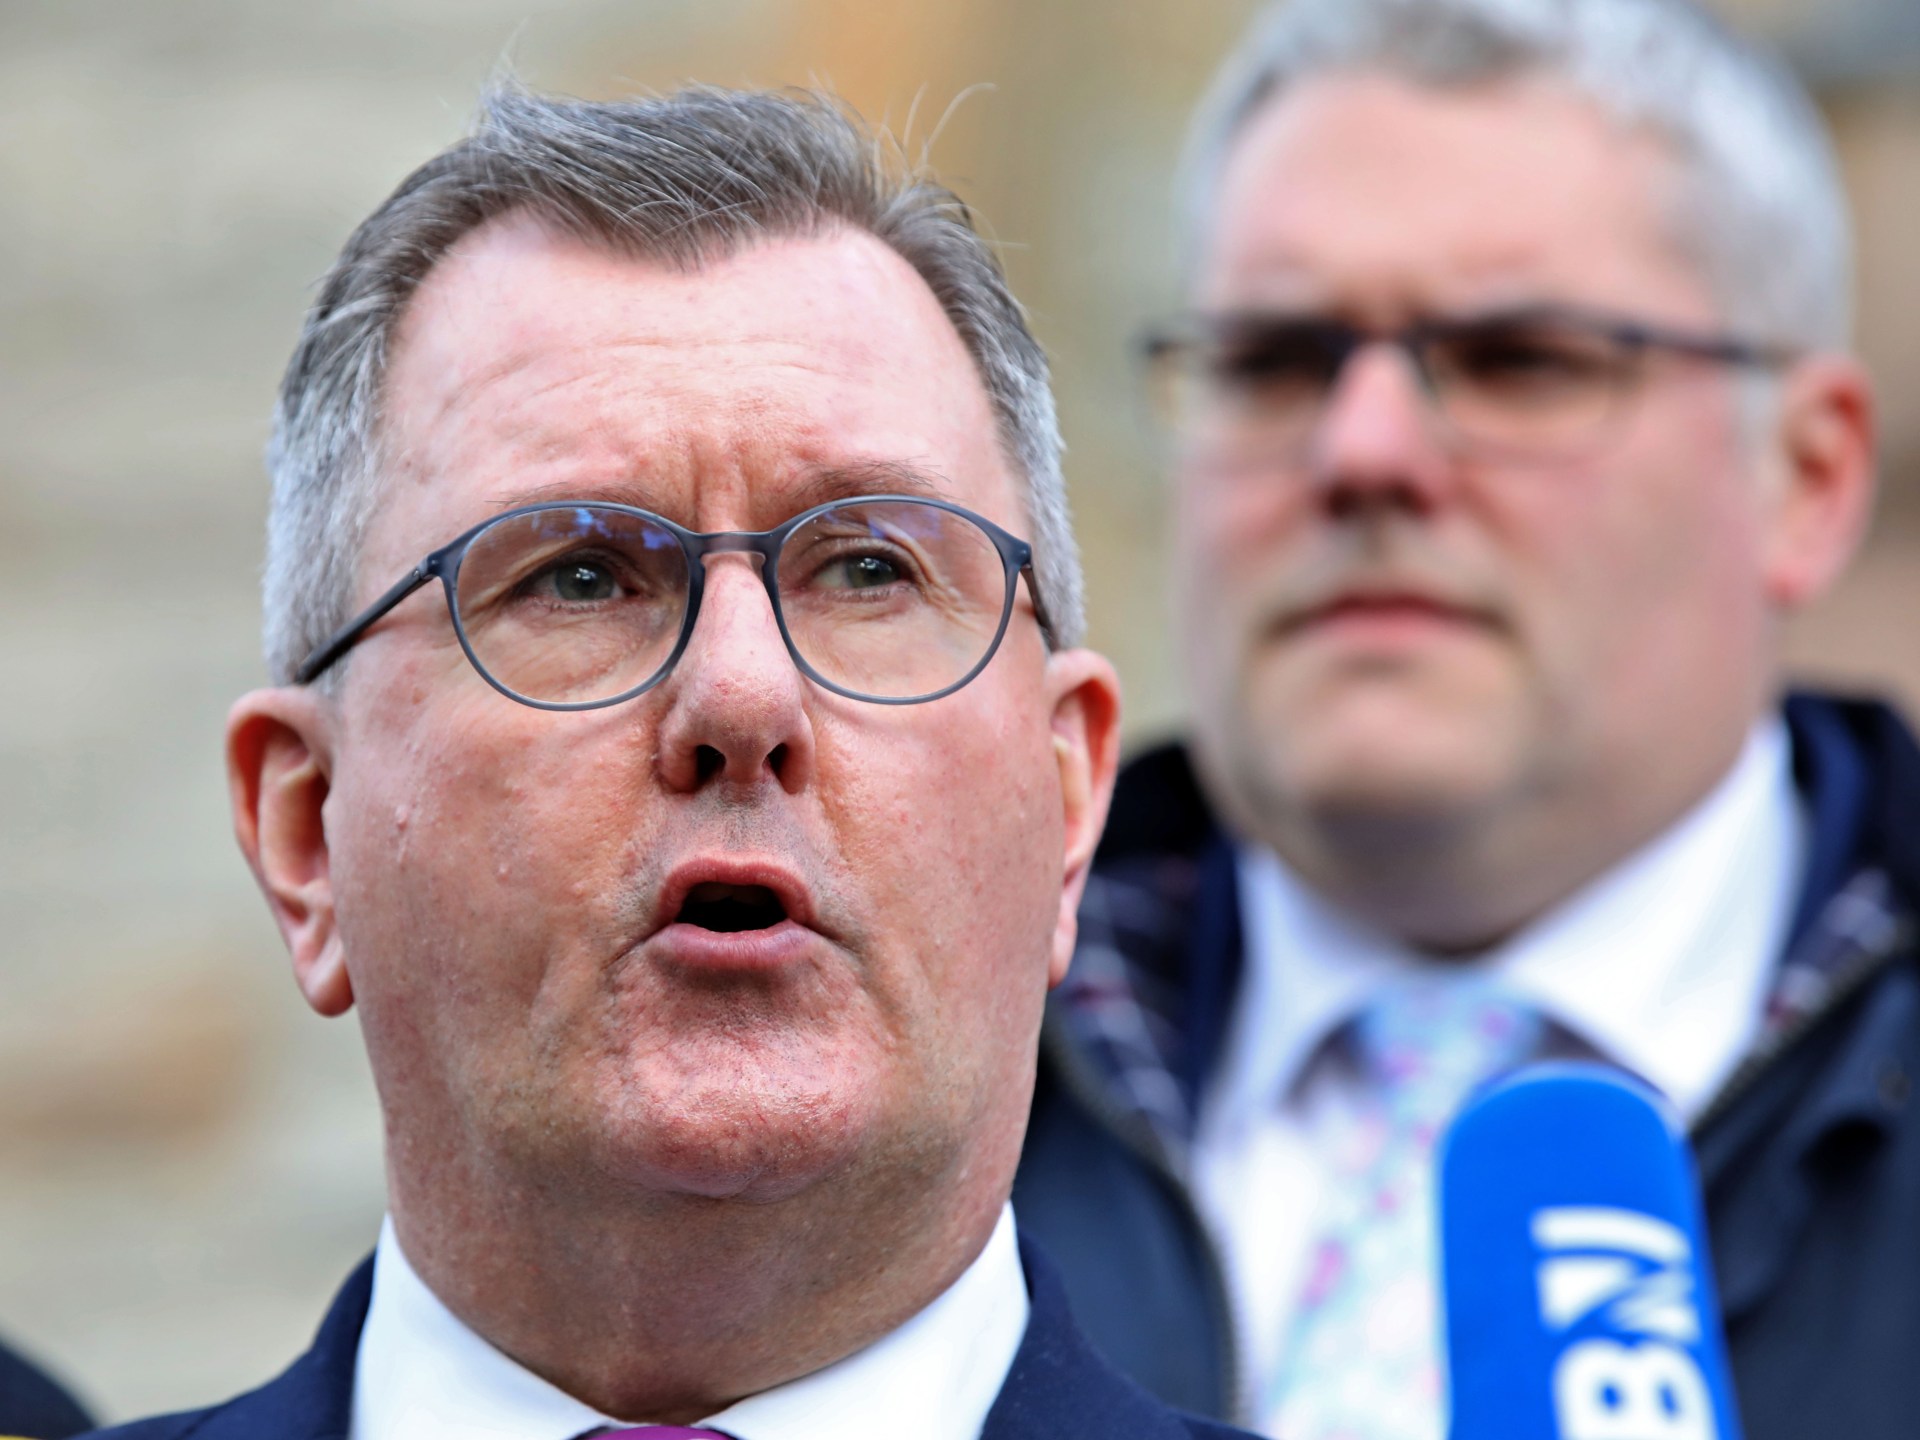 Northern Ireland DUP leader Jeffrey Donaldson resigns after police charges